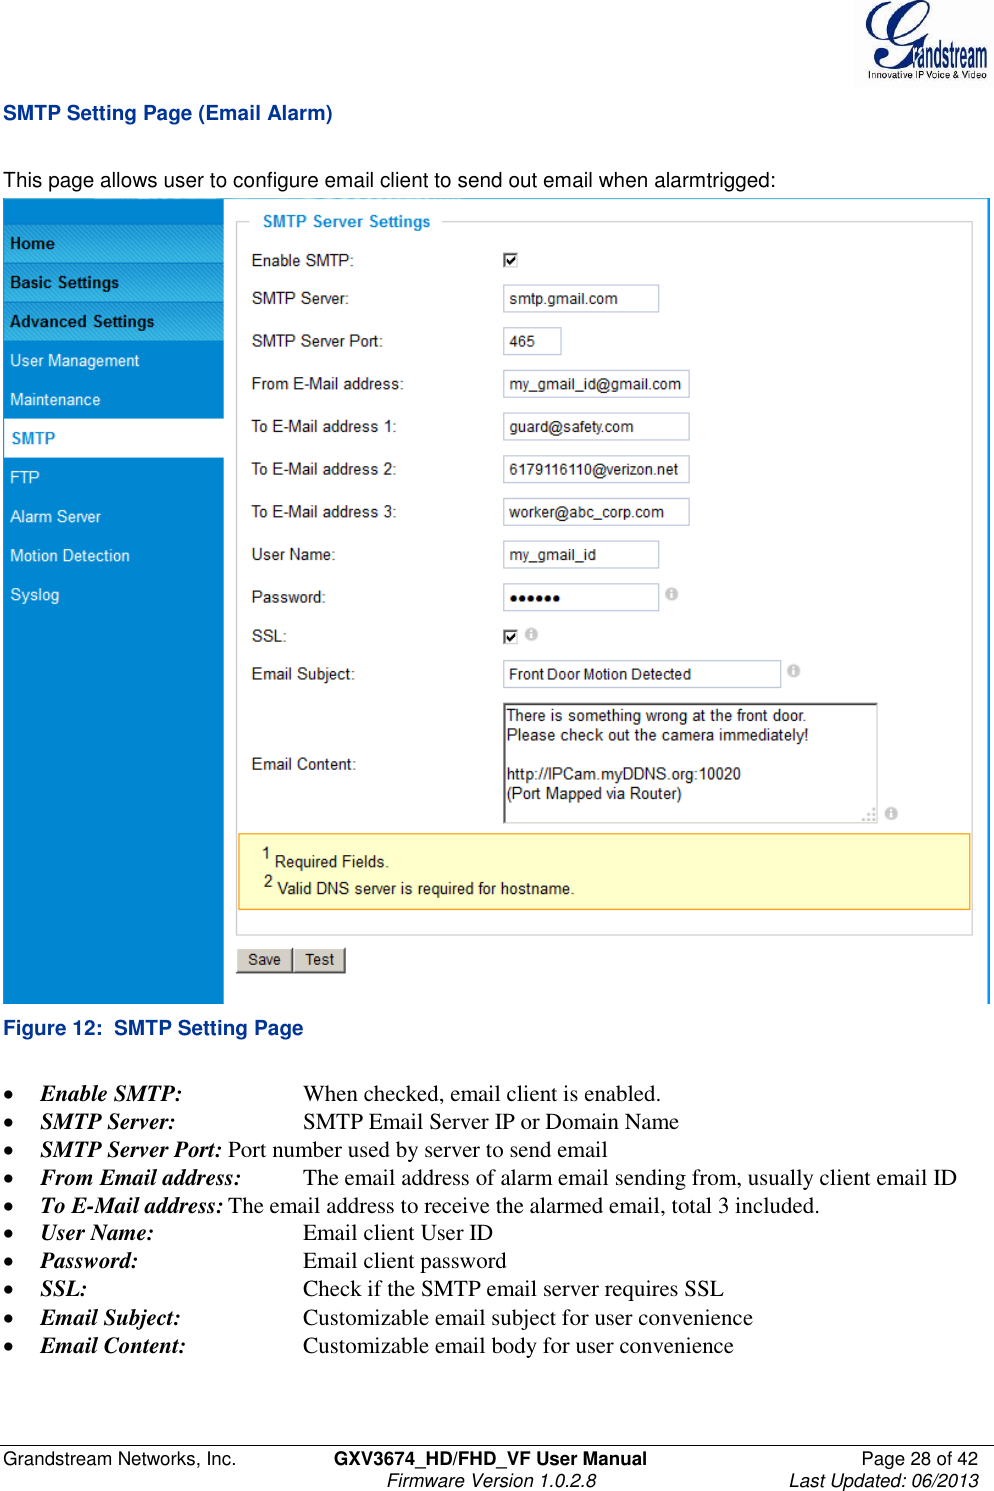  Grandstream Networks, Inc.  GXV3674_HD/FHD_VF User Manual  Page 28 of 42   Firmware Version 1.0.2.8  Last Updated: 06/2013  SMTP Setting Page (Email Alarm)  This page allows user to configure email client to send out email when alarmtrigged:  Figure 12:  SMTP Setting Page   Enable SMTP:     When checked, email client is enabled.  SMTP Server:    SMTP Email Server IP or Domain Name  SMTP Server Port: Port number used by server to send email  From Email address:  The email address of alarm email sending from, usually client email ID  To E-Mail address: The email address to receive the alarmed email, total 3 included.   User Name:    Email client User ID  Password:      Email client password  SSL:      Check if the SMTP email server requires SSL  Email Subject:    Customizable email subject for user convenience  Email Content:    Customizable email body for user convenience   